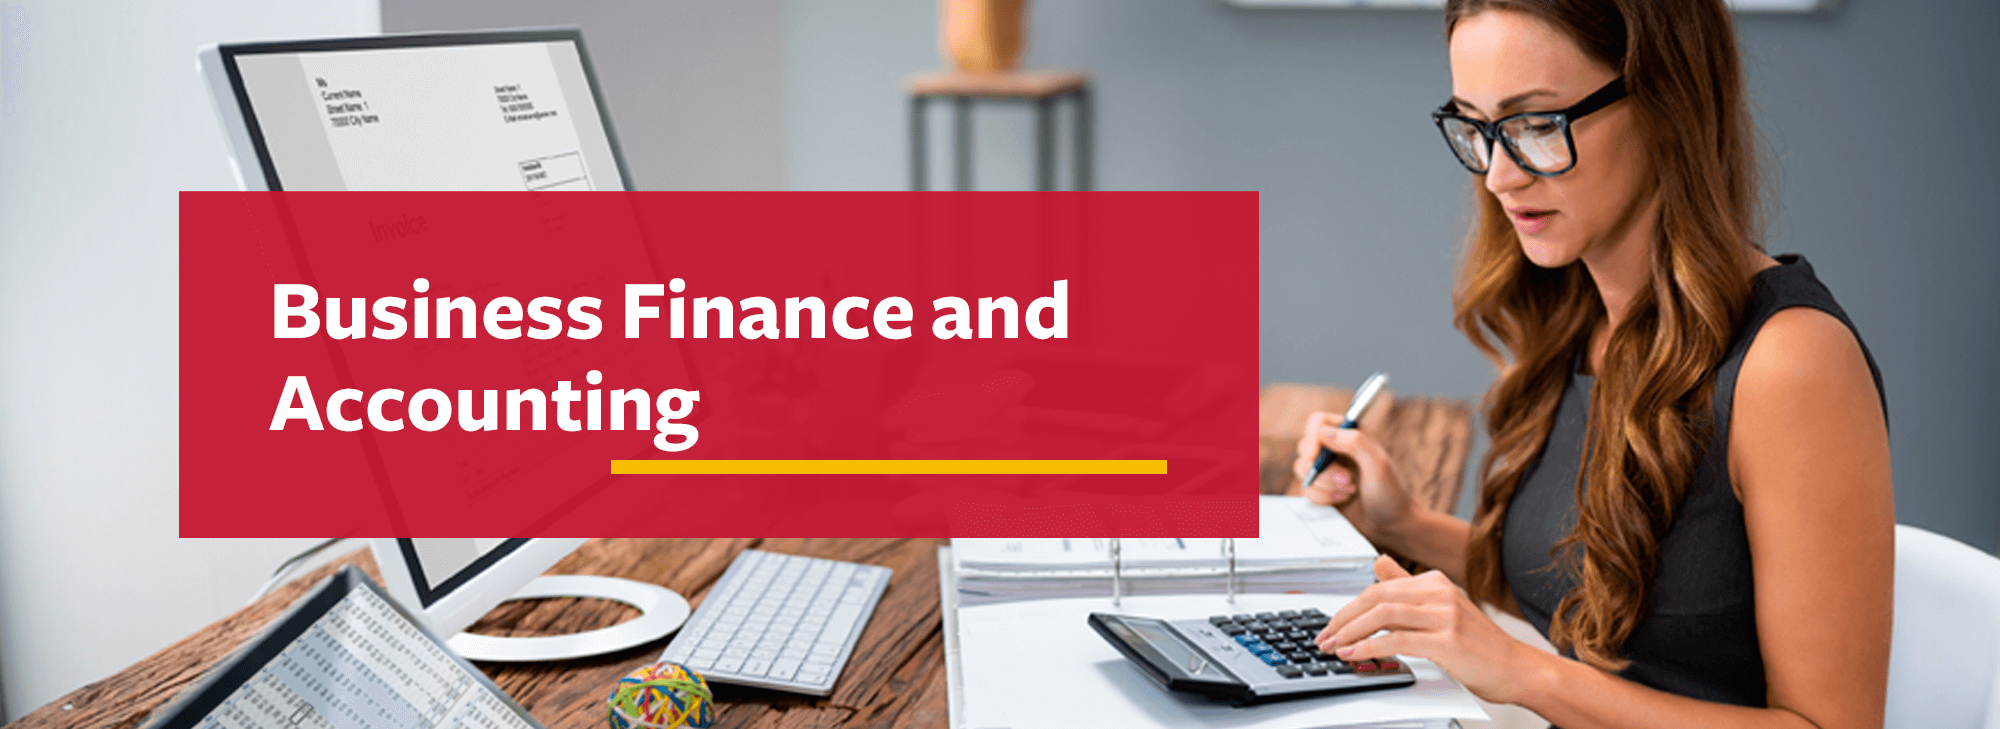 Business Finance and Accounting